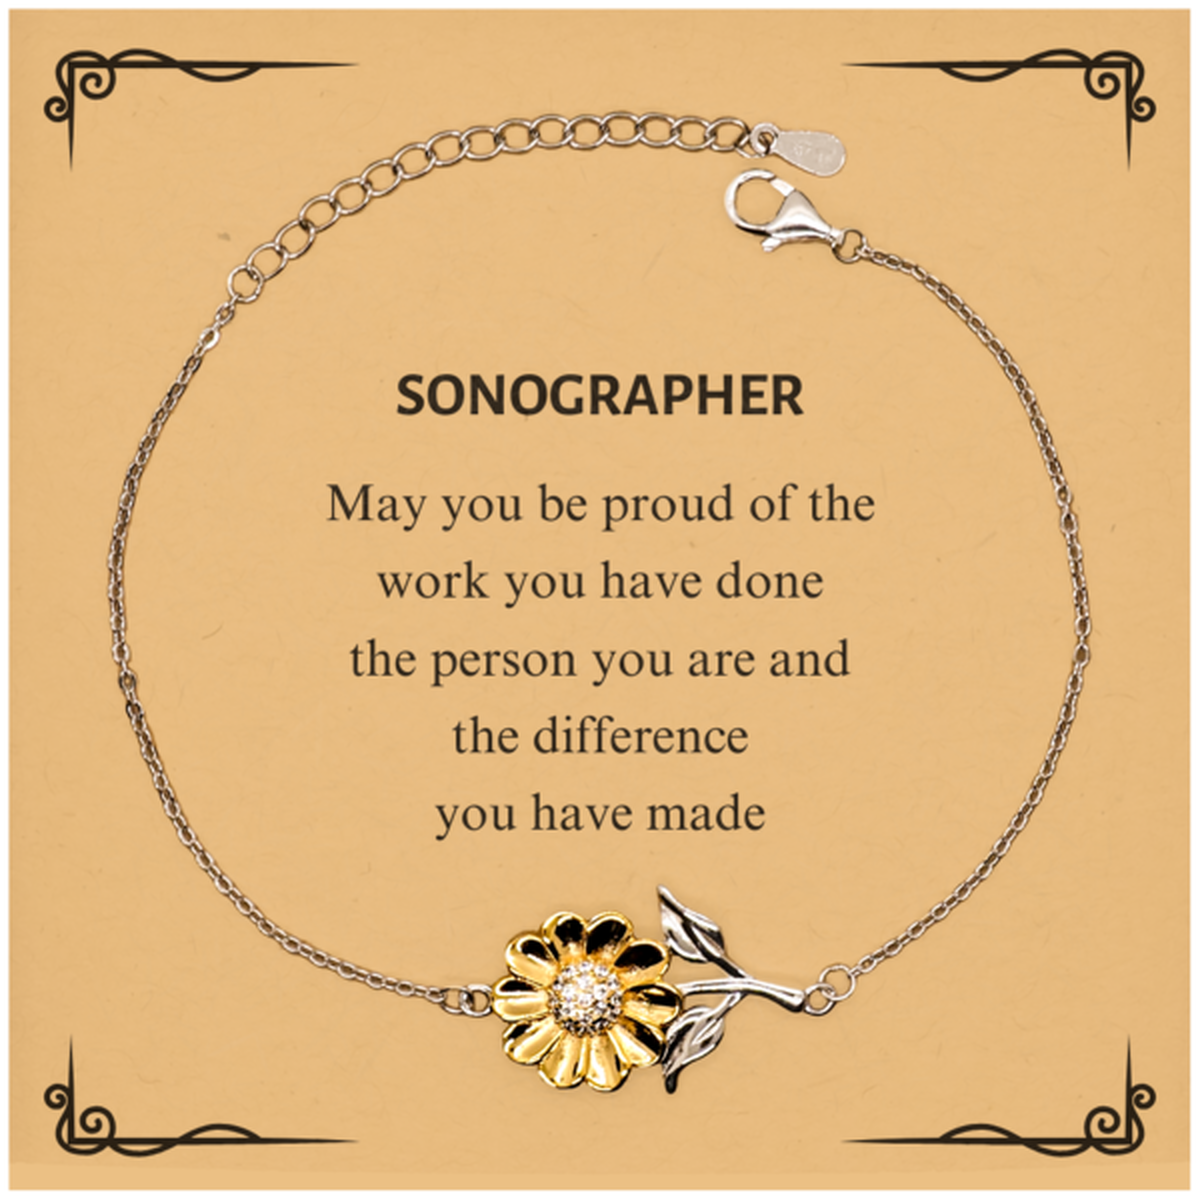 Sonographer May you be proud of the work you have done, Retirement Sonographer Sunflower Bracelet for Colleague Appreciation Gifts Amazing for Sonographer